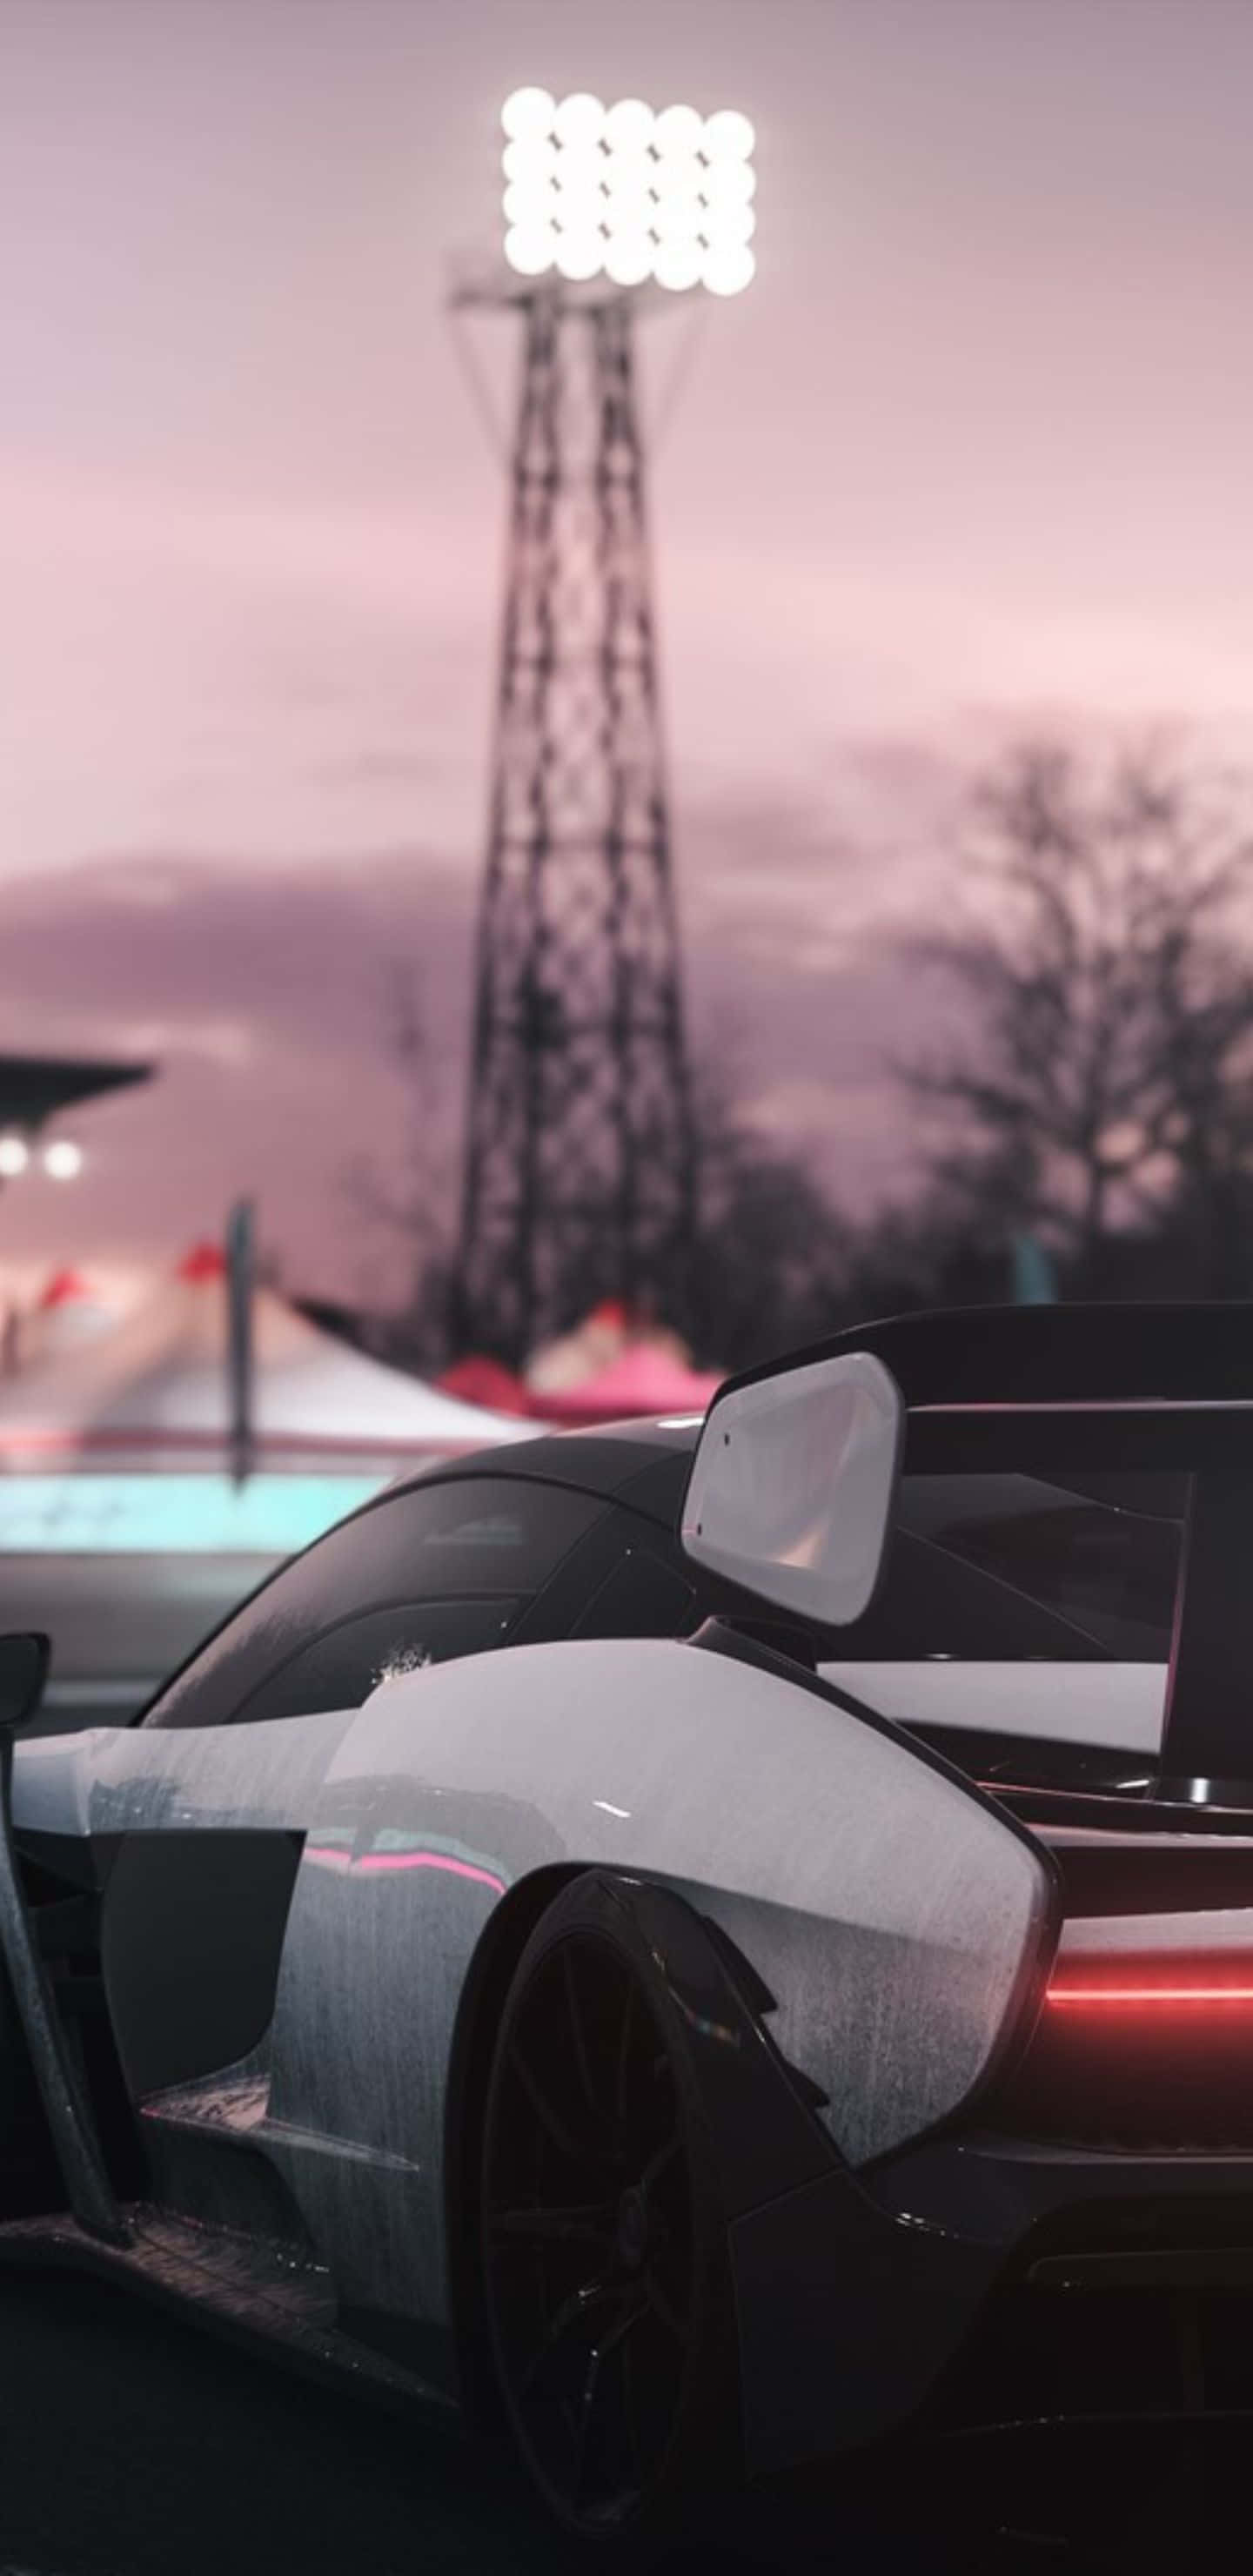 Experience stunning visuals and game play on the new Pixel 3xL and Forza Horizon 4.